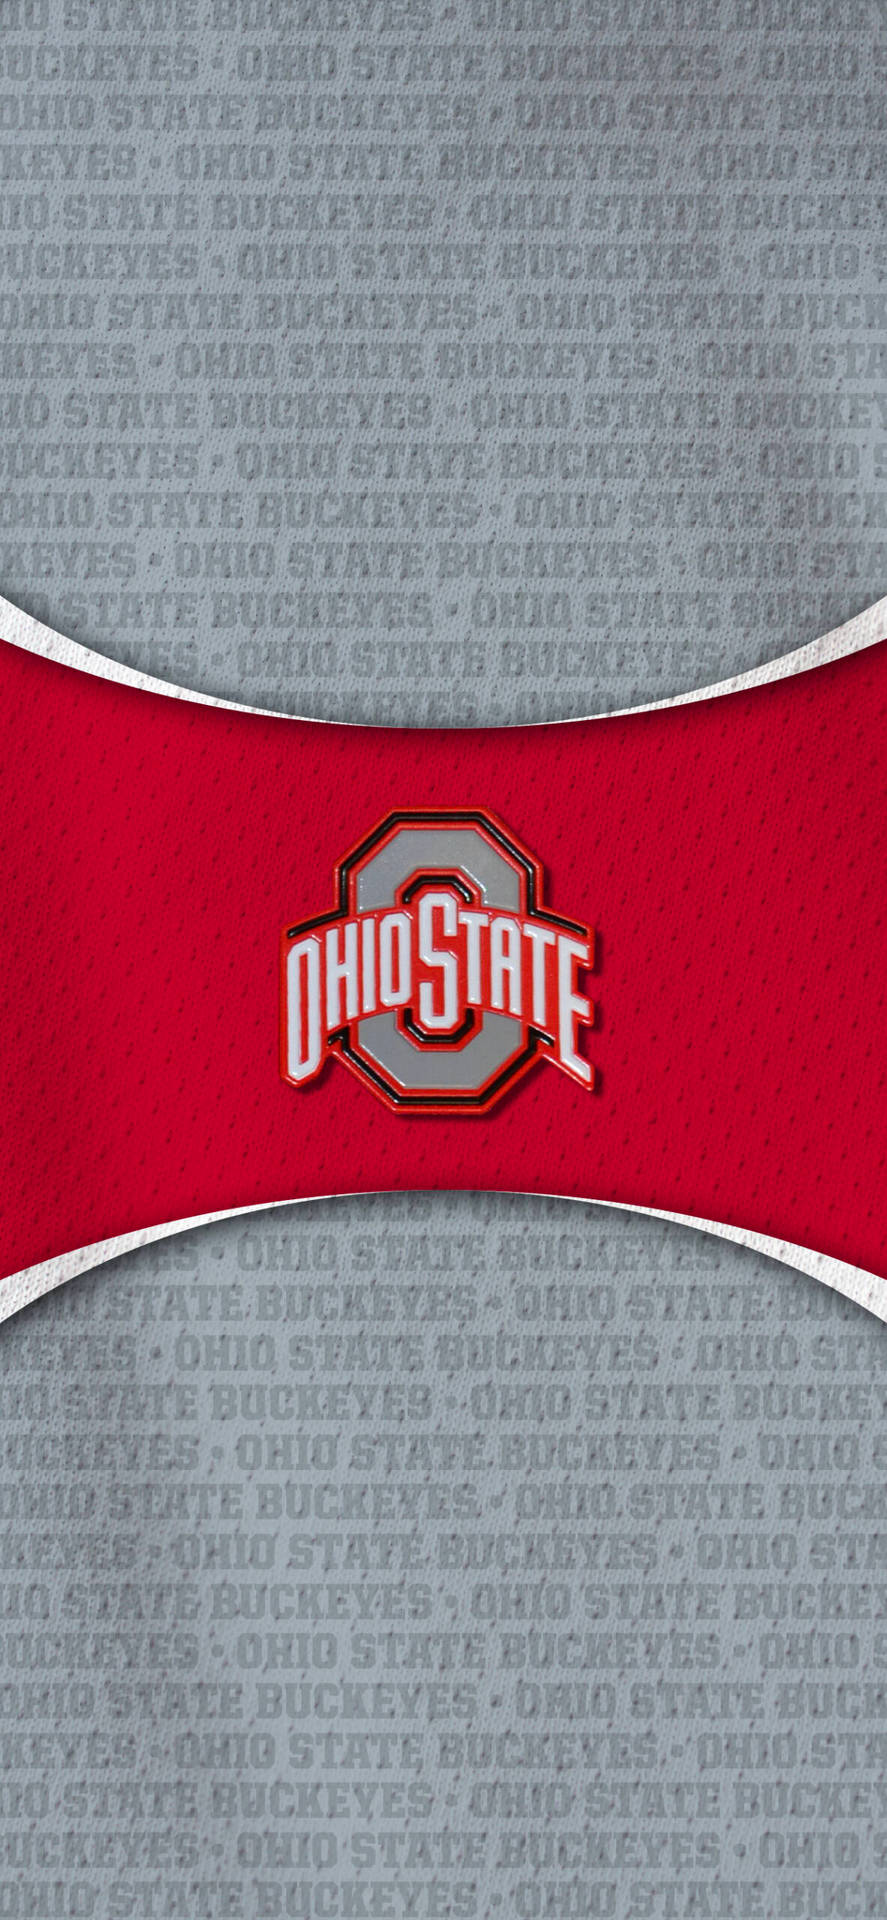 Ohio State University Gray And Red Wallpaper